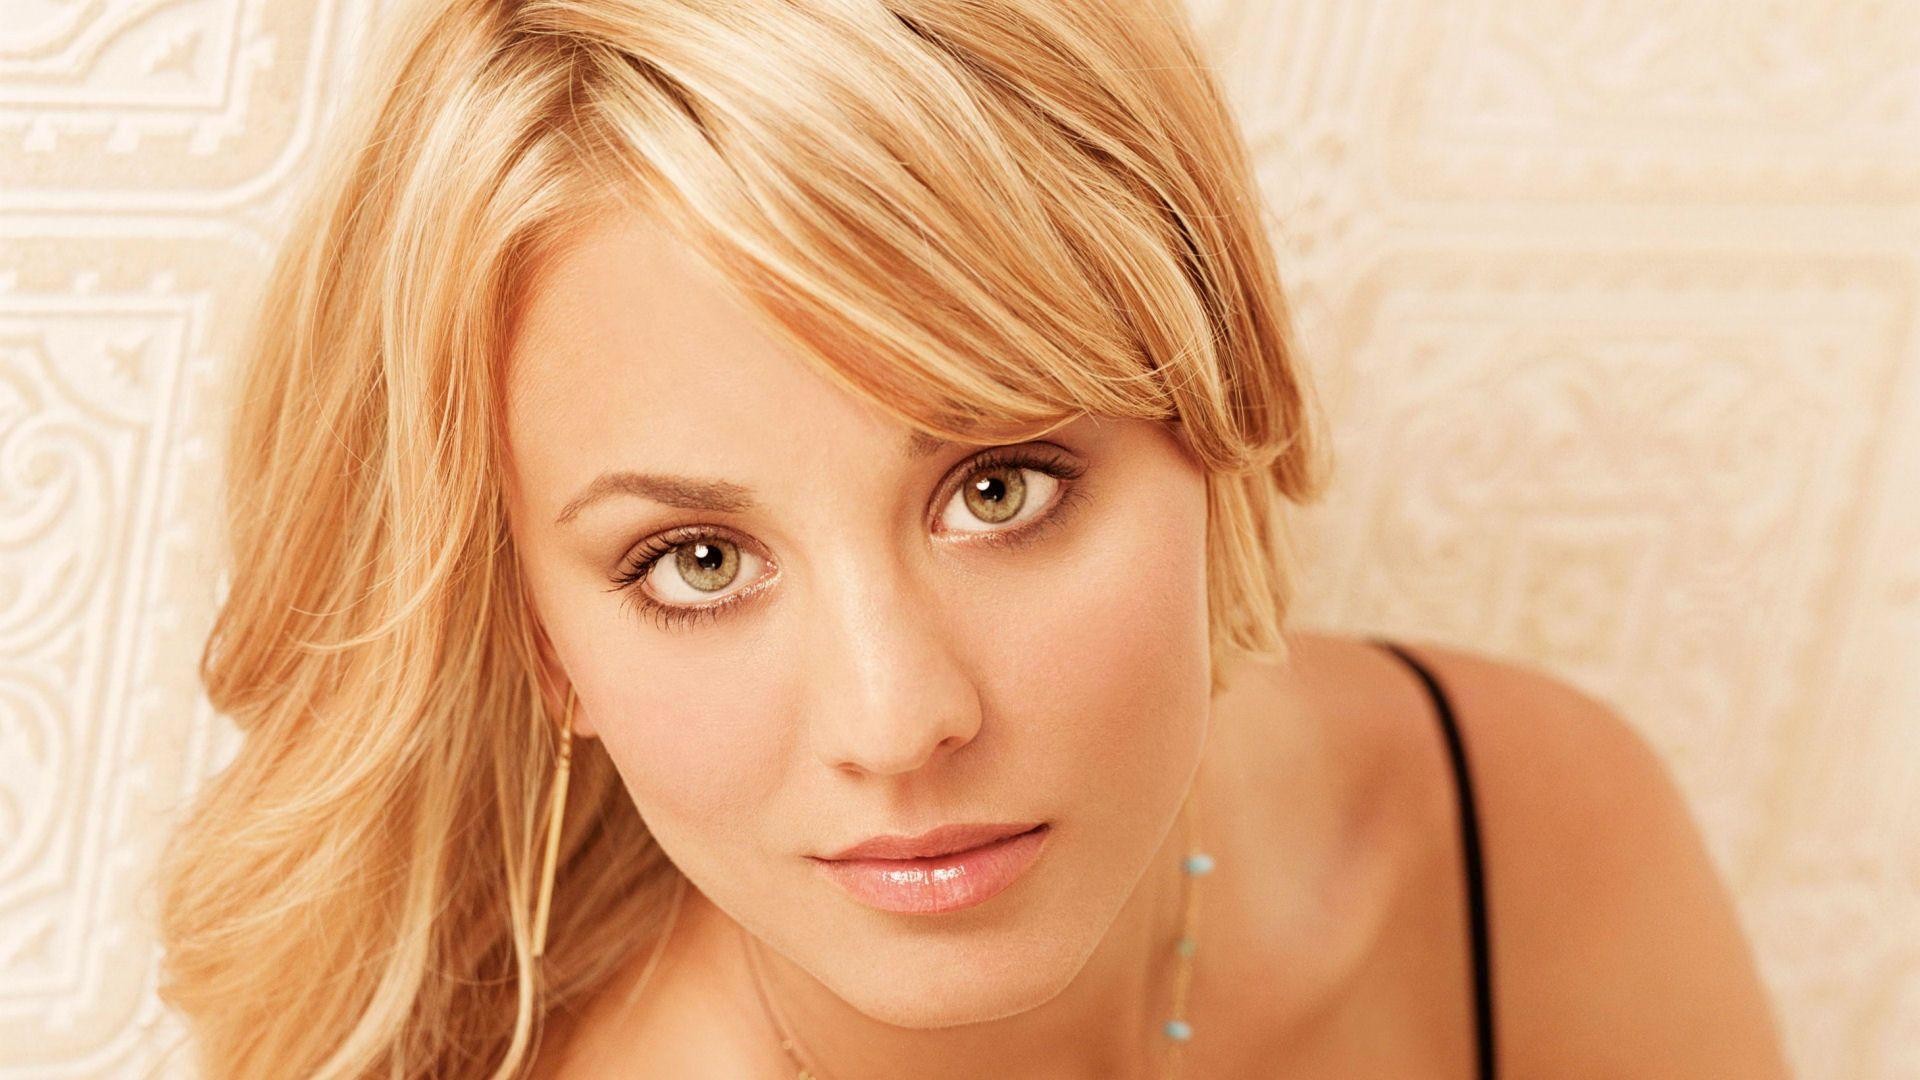 Download Kaley Cuoco Wallpaper 18692 px High Resolution .